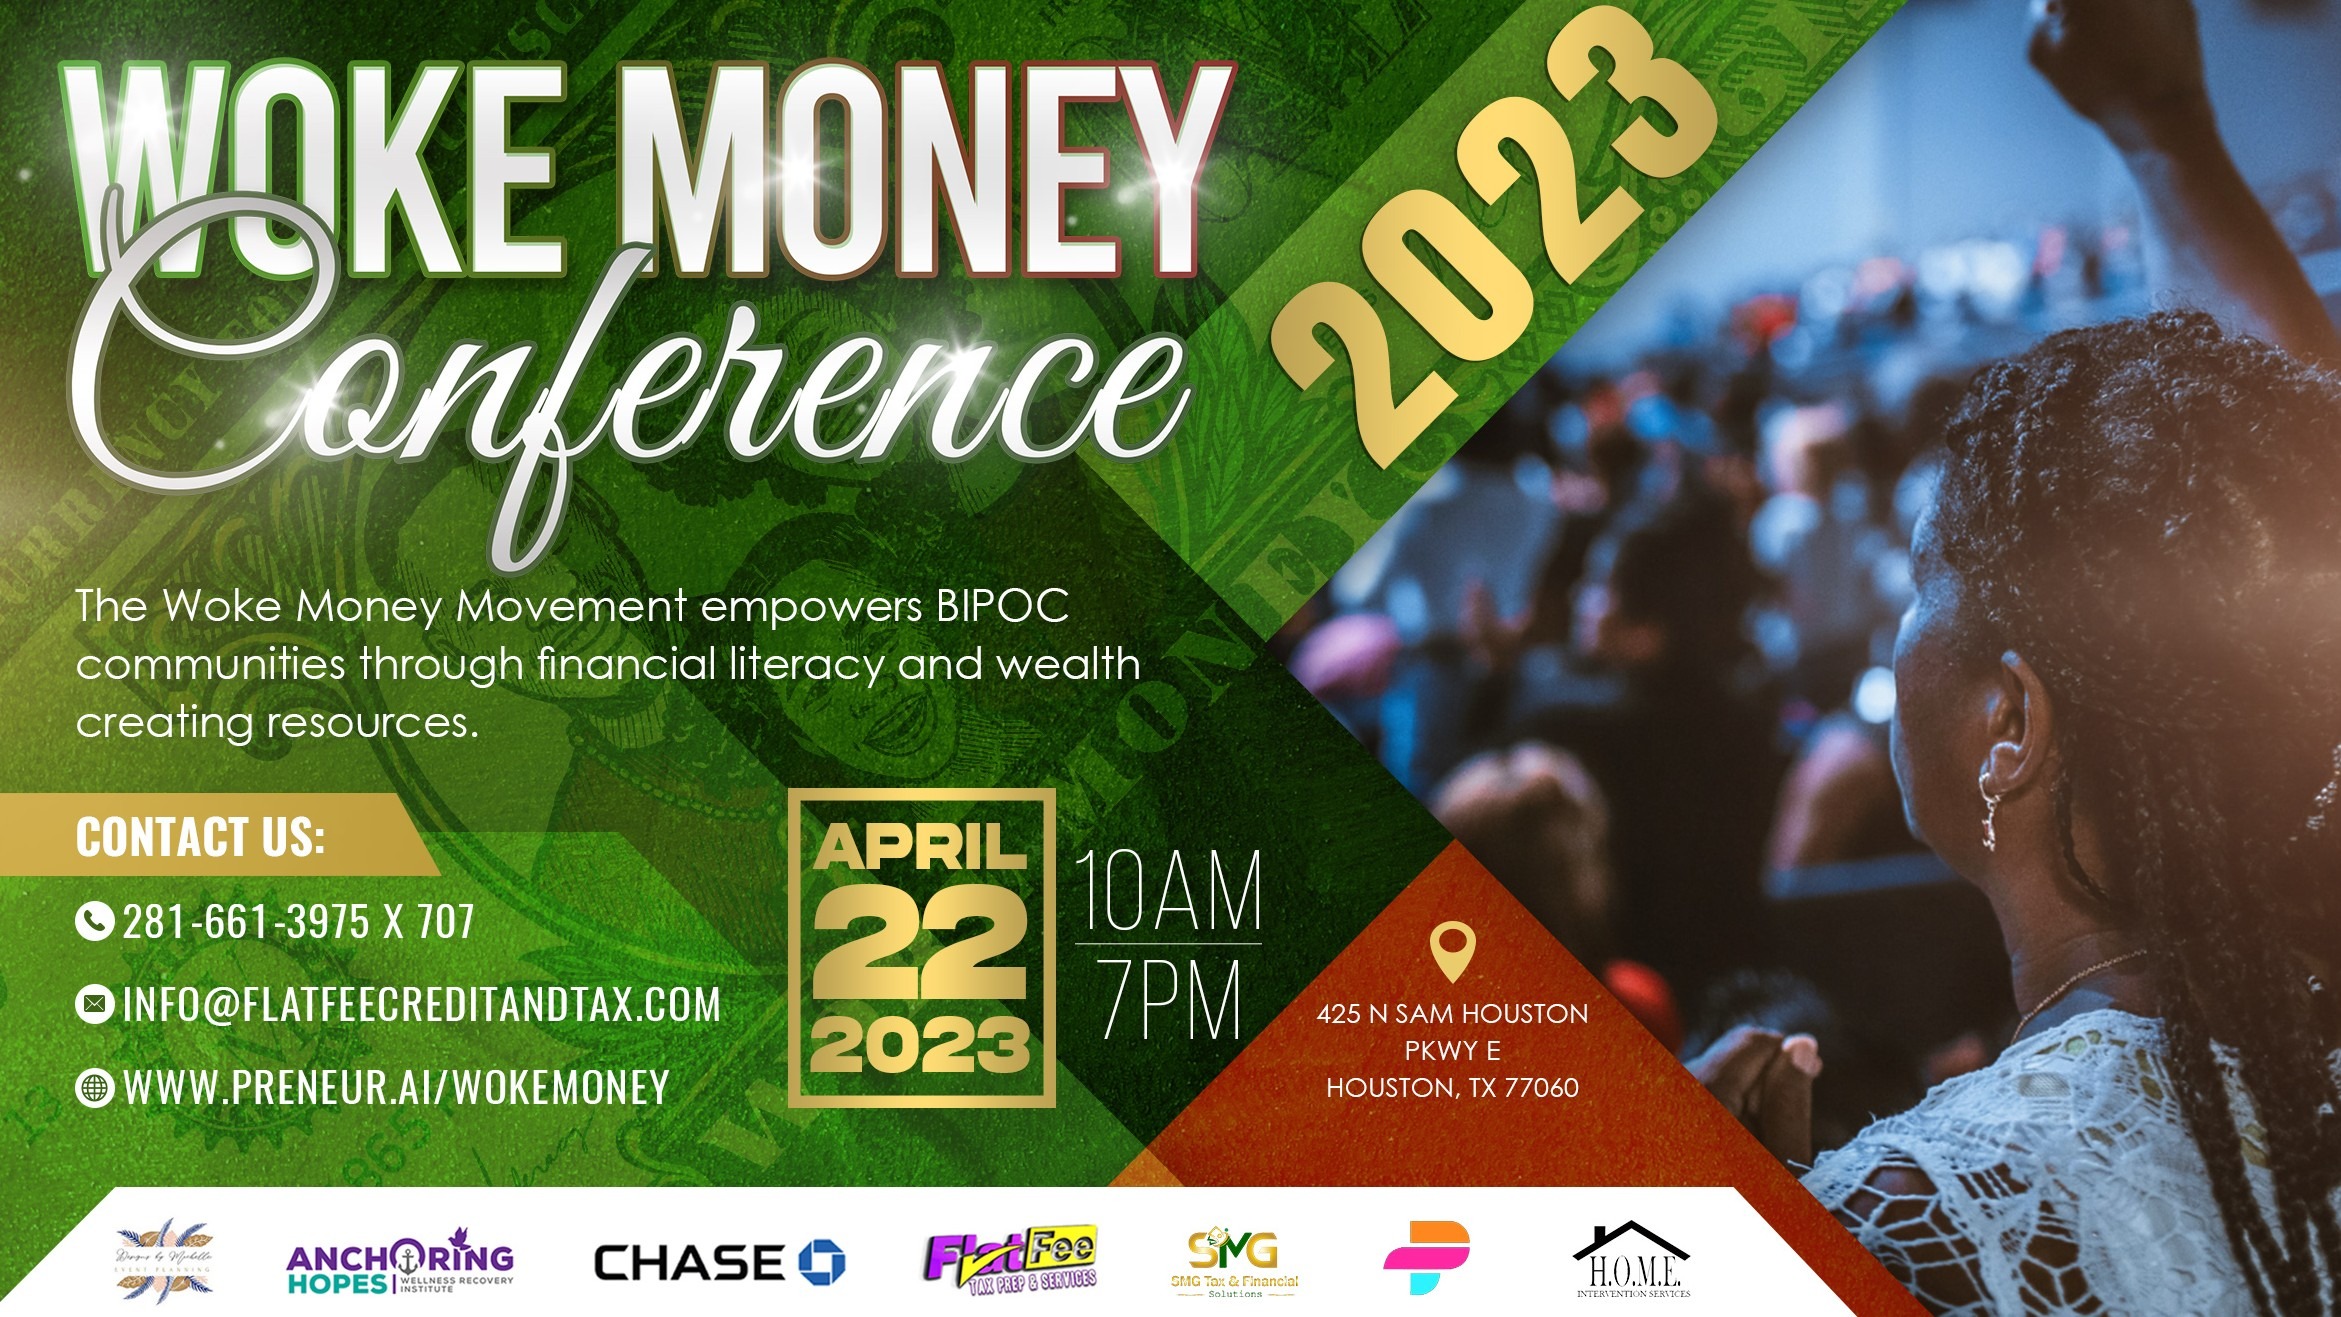 BIPOC Money Questions? Book Your Spot At Woke Money Conference 2023 In Houston